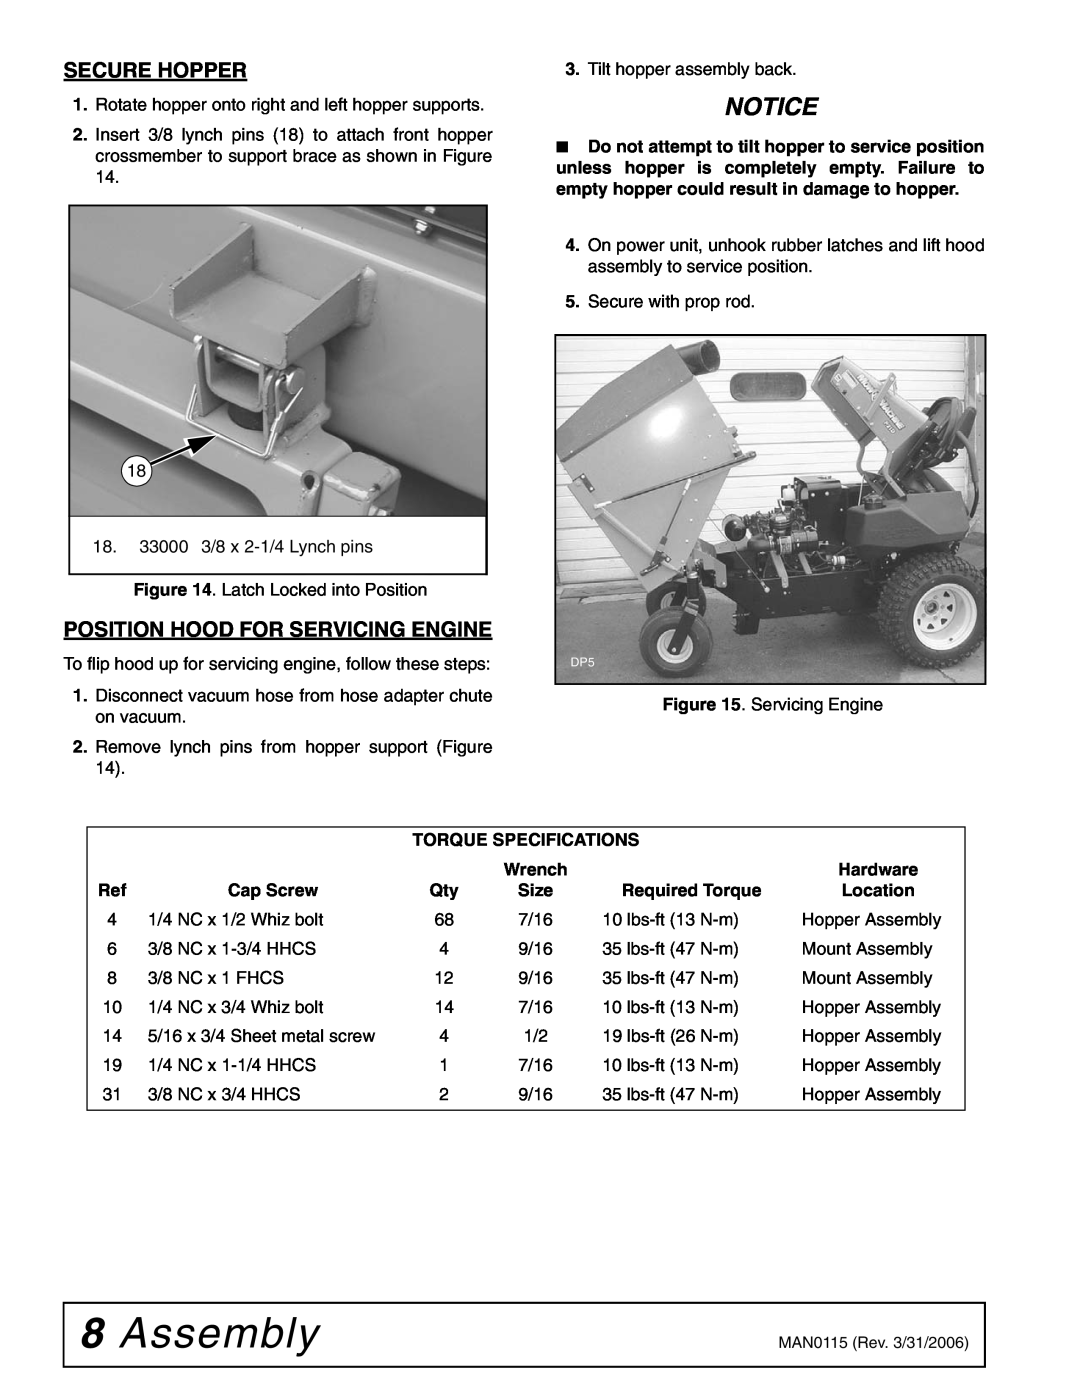 Woods Equipment MAN0115 Assembly, Secure Hopper, Position Hood For Servicing Engine, Torque Specifications, Wrench, Notice 